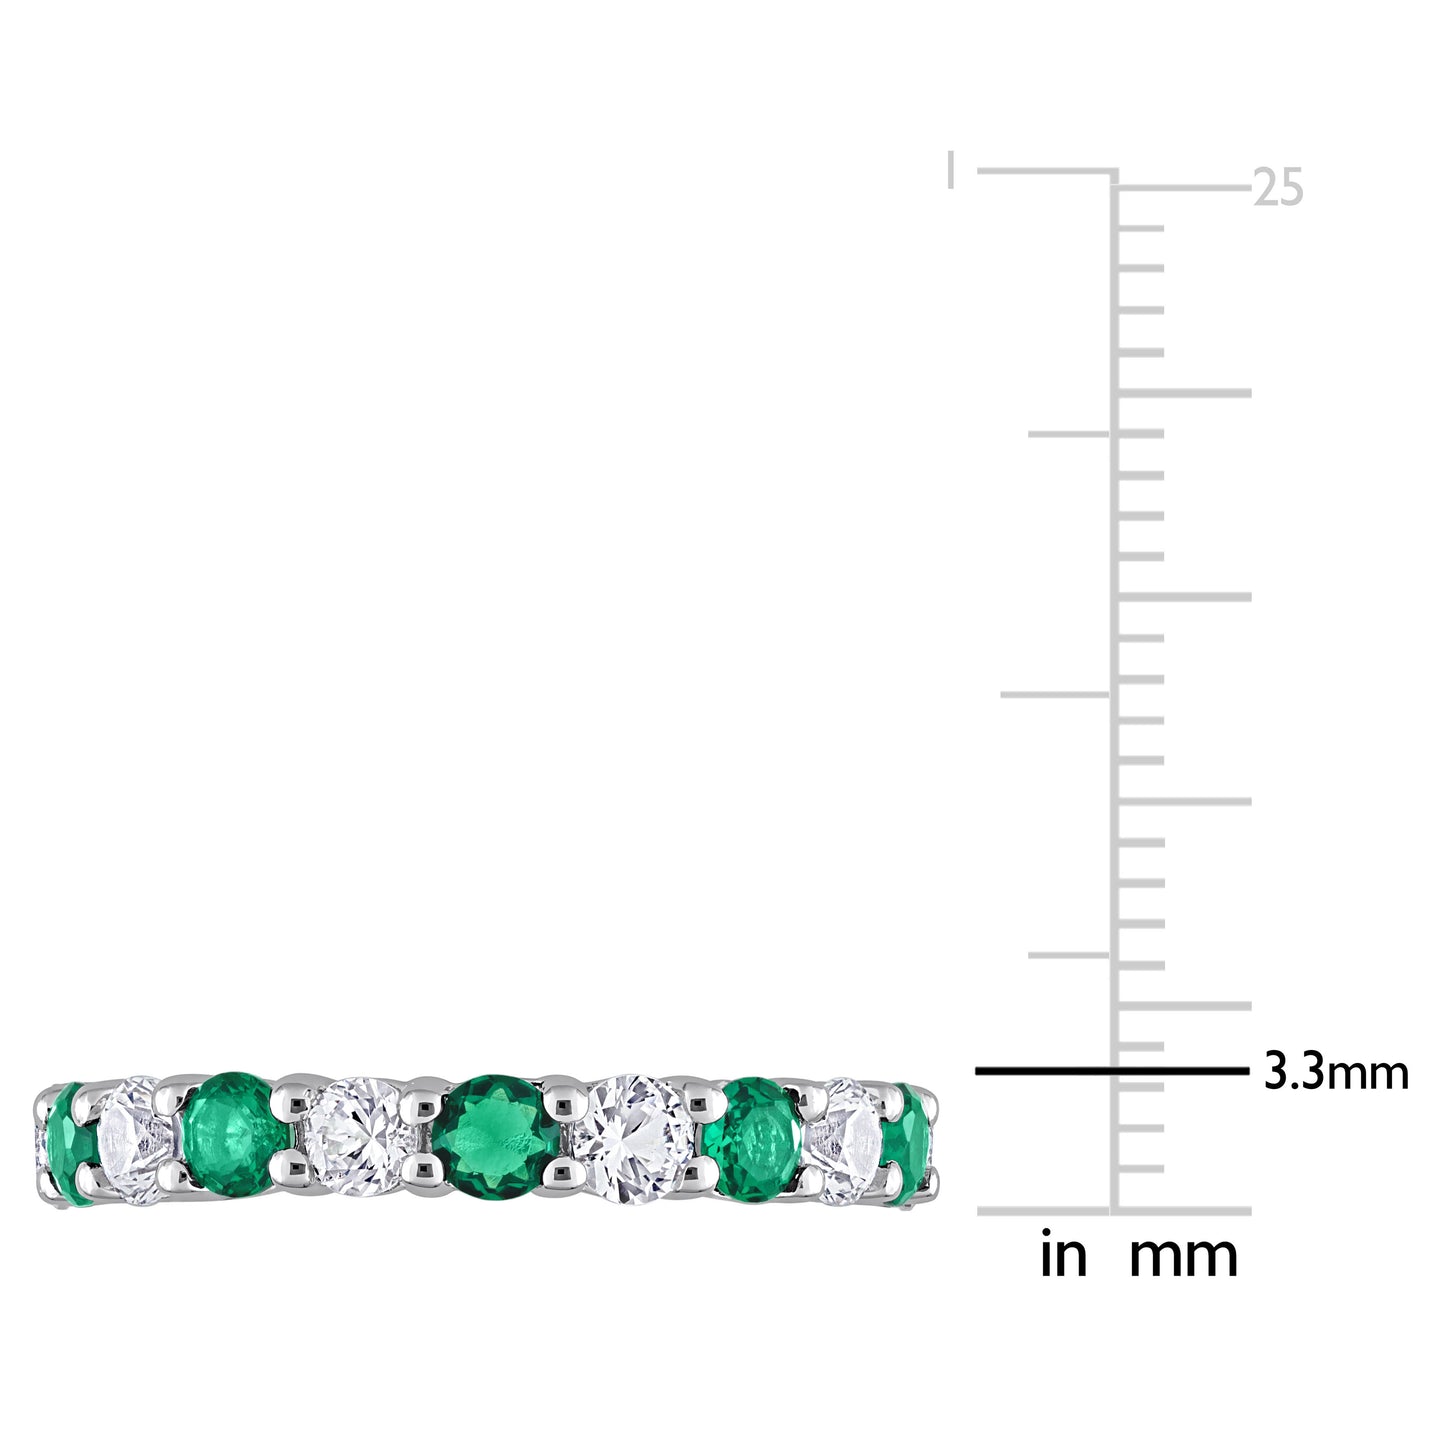 3 1/5 ct TGW Created emerald created white sapphire eternity ring silver